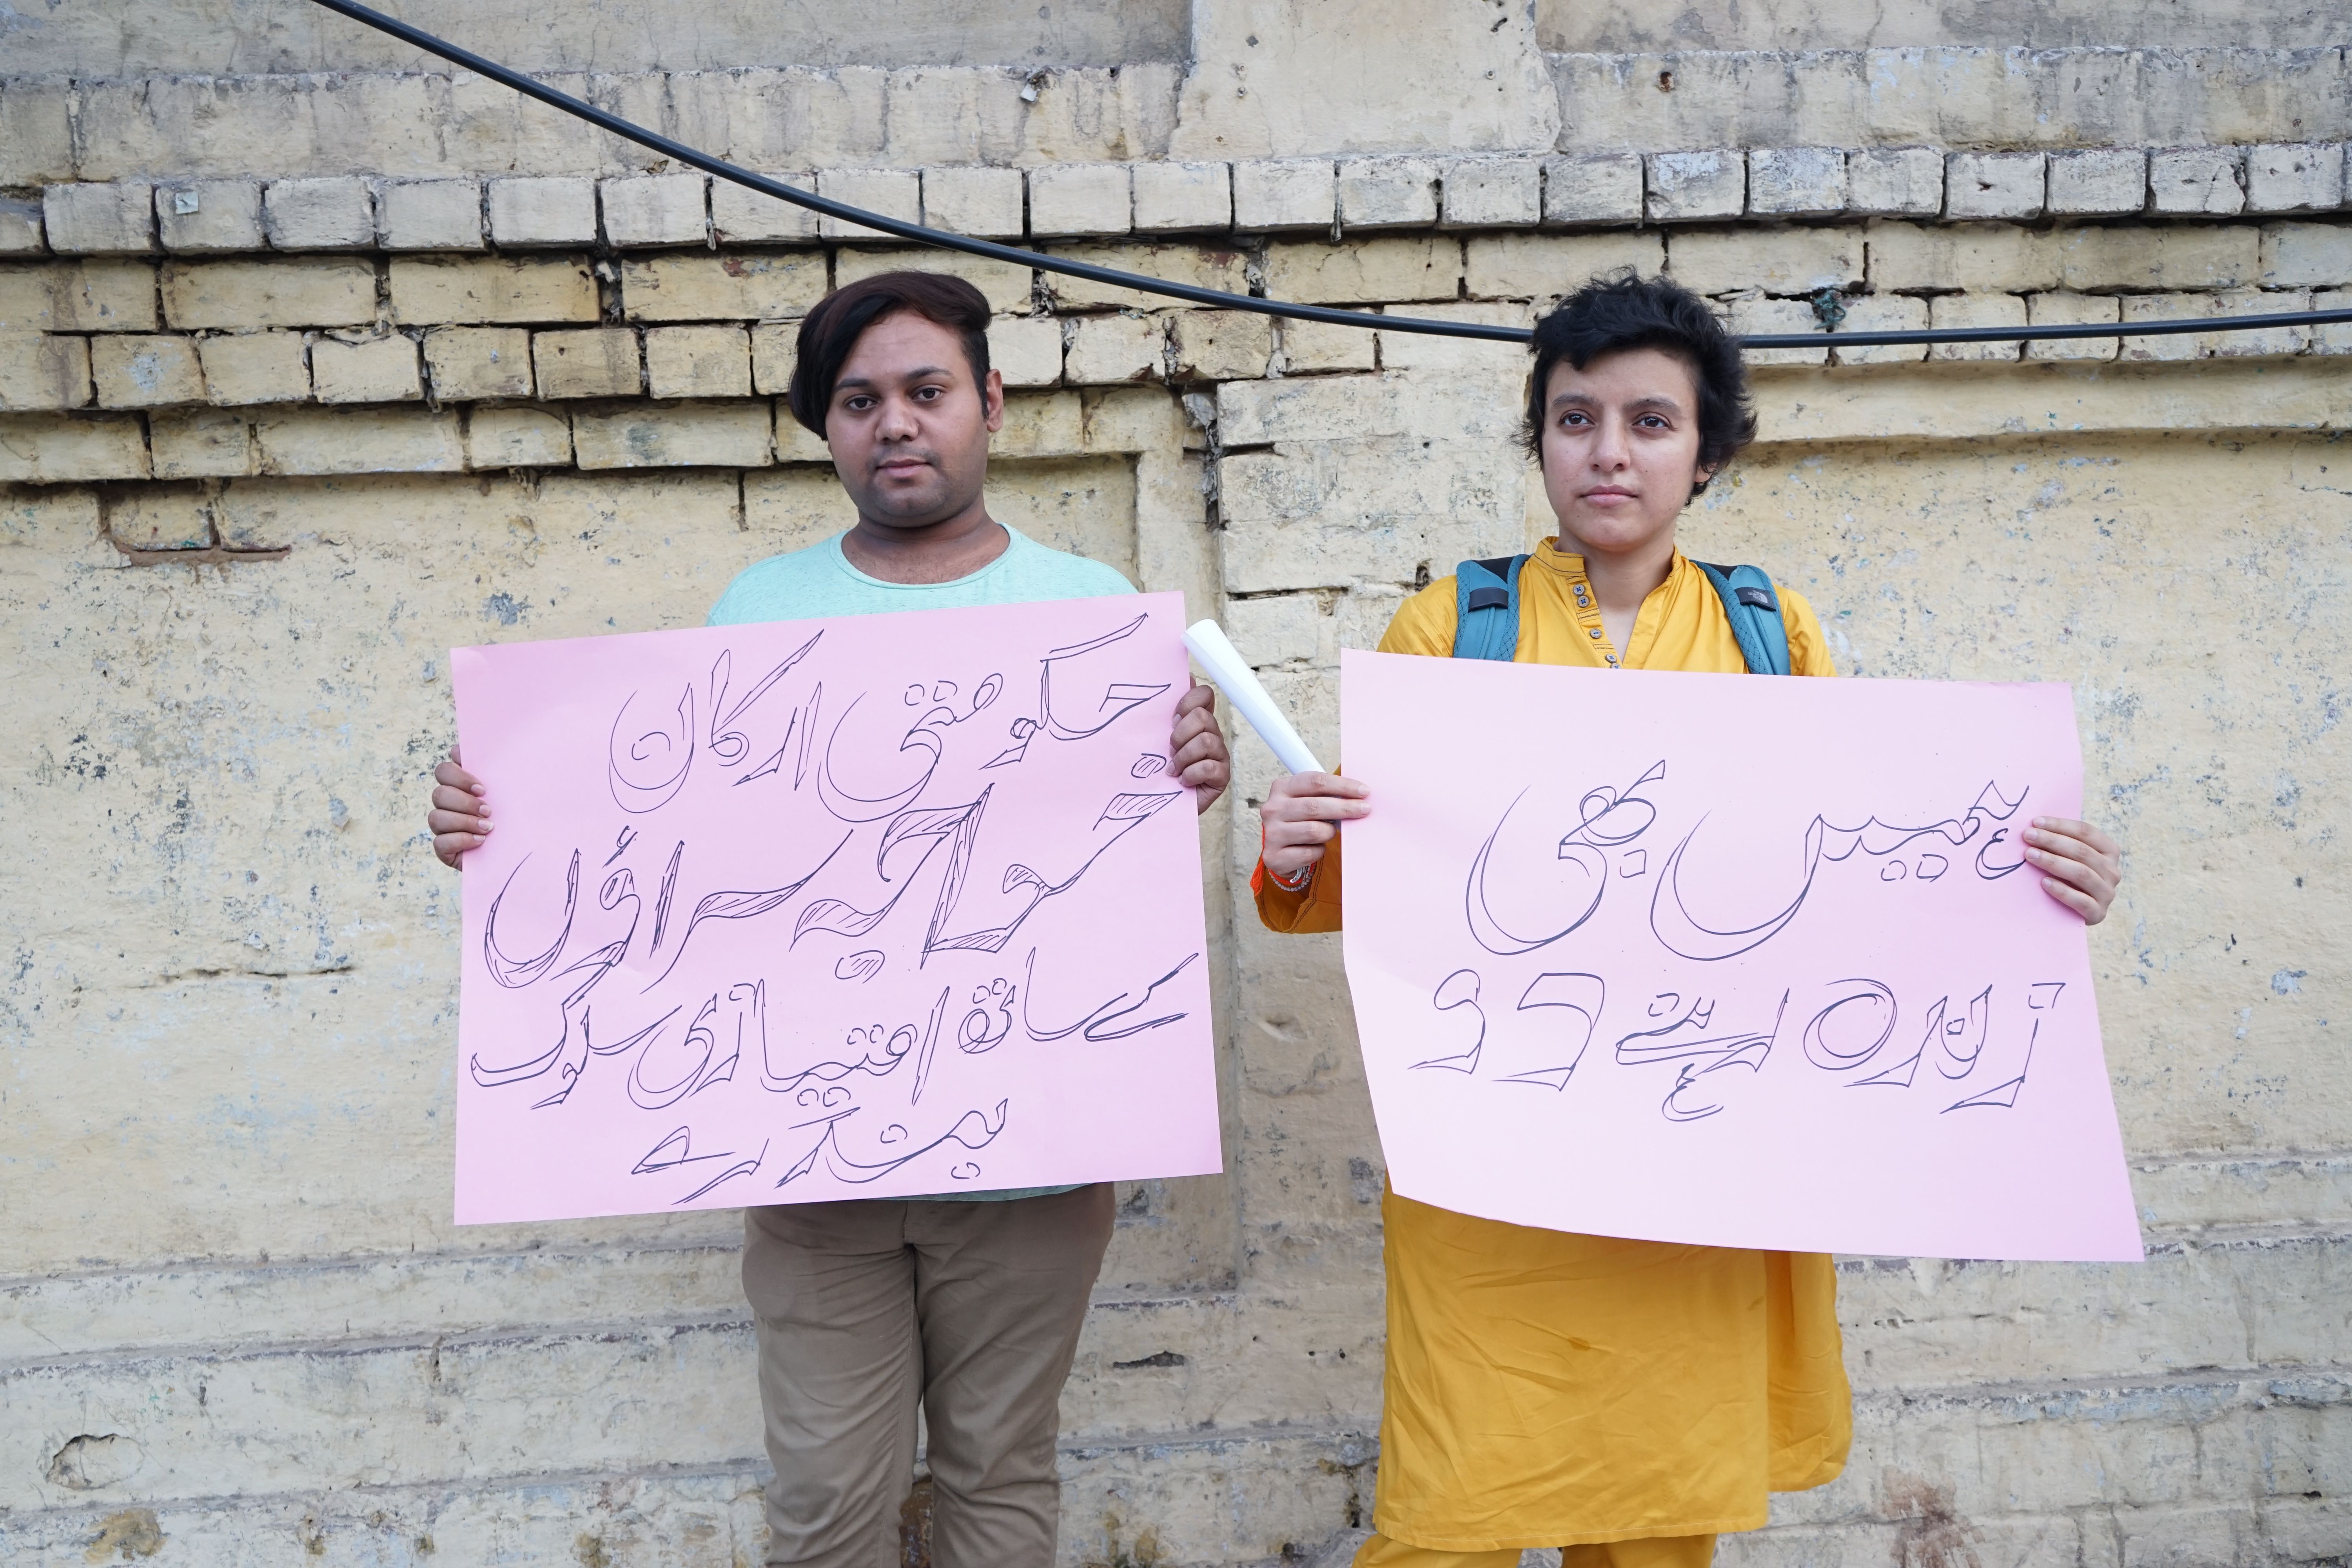 Two protesters, Sara and Sunny, holding signs in solidarity with the khawaja sira community.  Signs right to left read: "Let us live, too" and  "Government members, stop discriminating against khawaja siras." Image by Ikra Javed. Pakistan, 2016.